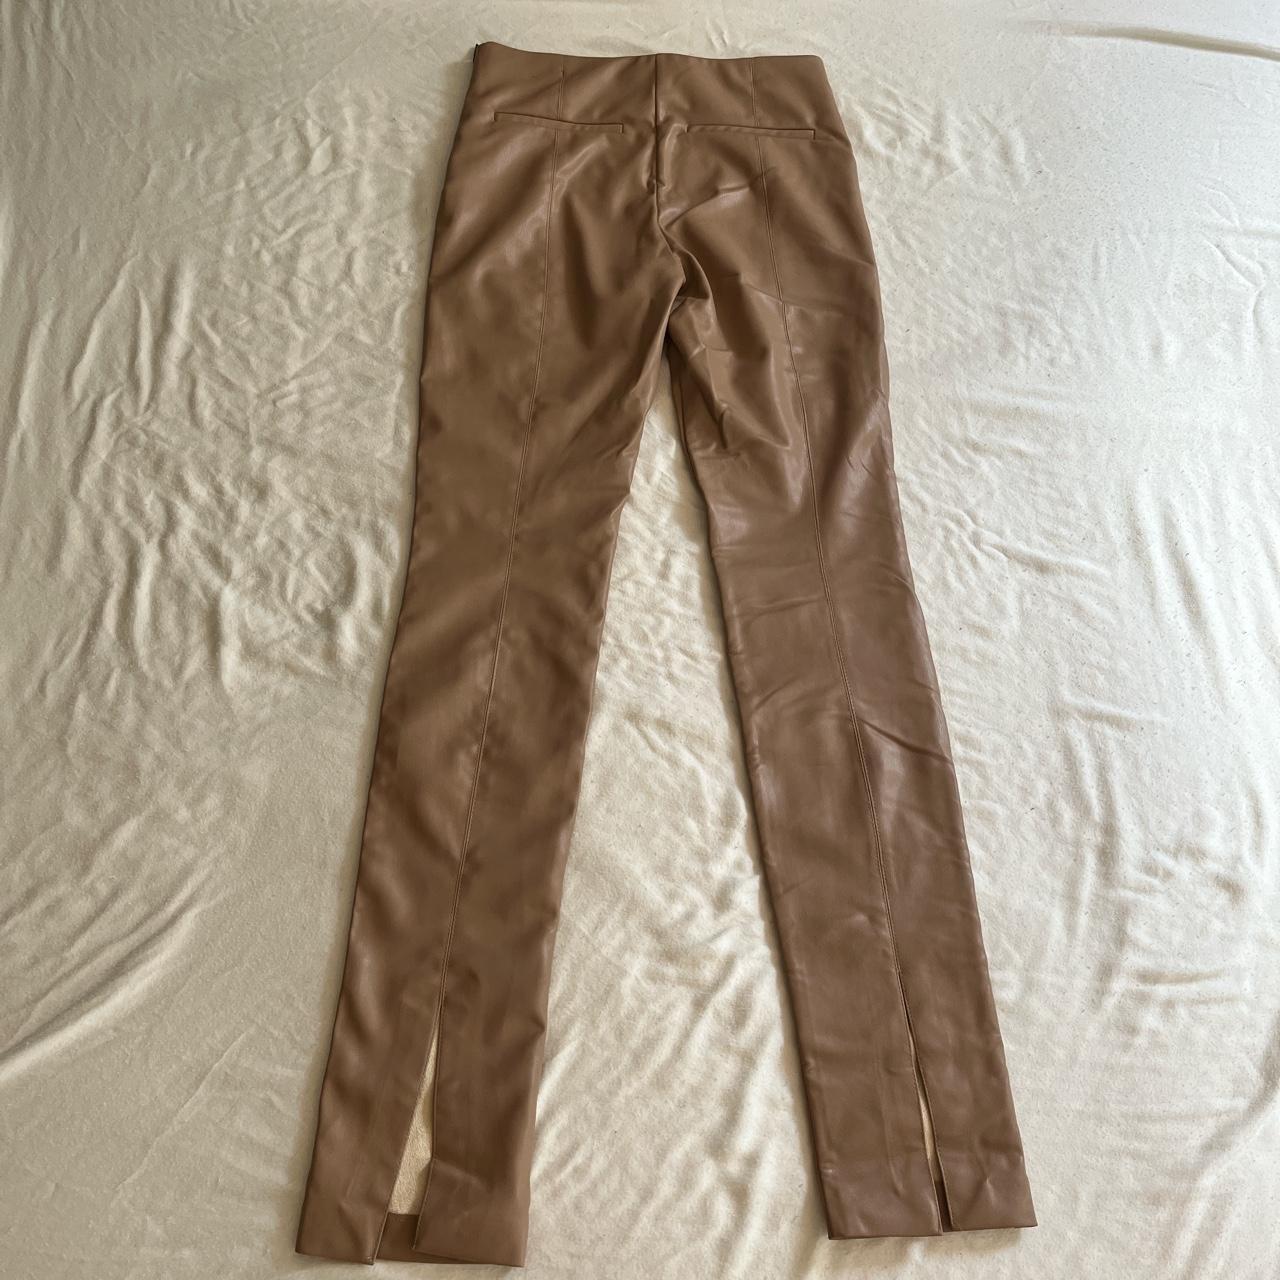 Faux leather pants from Zara. Size medium. The